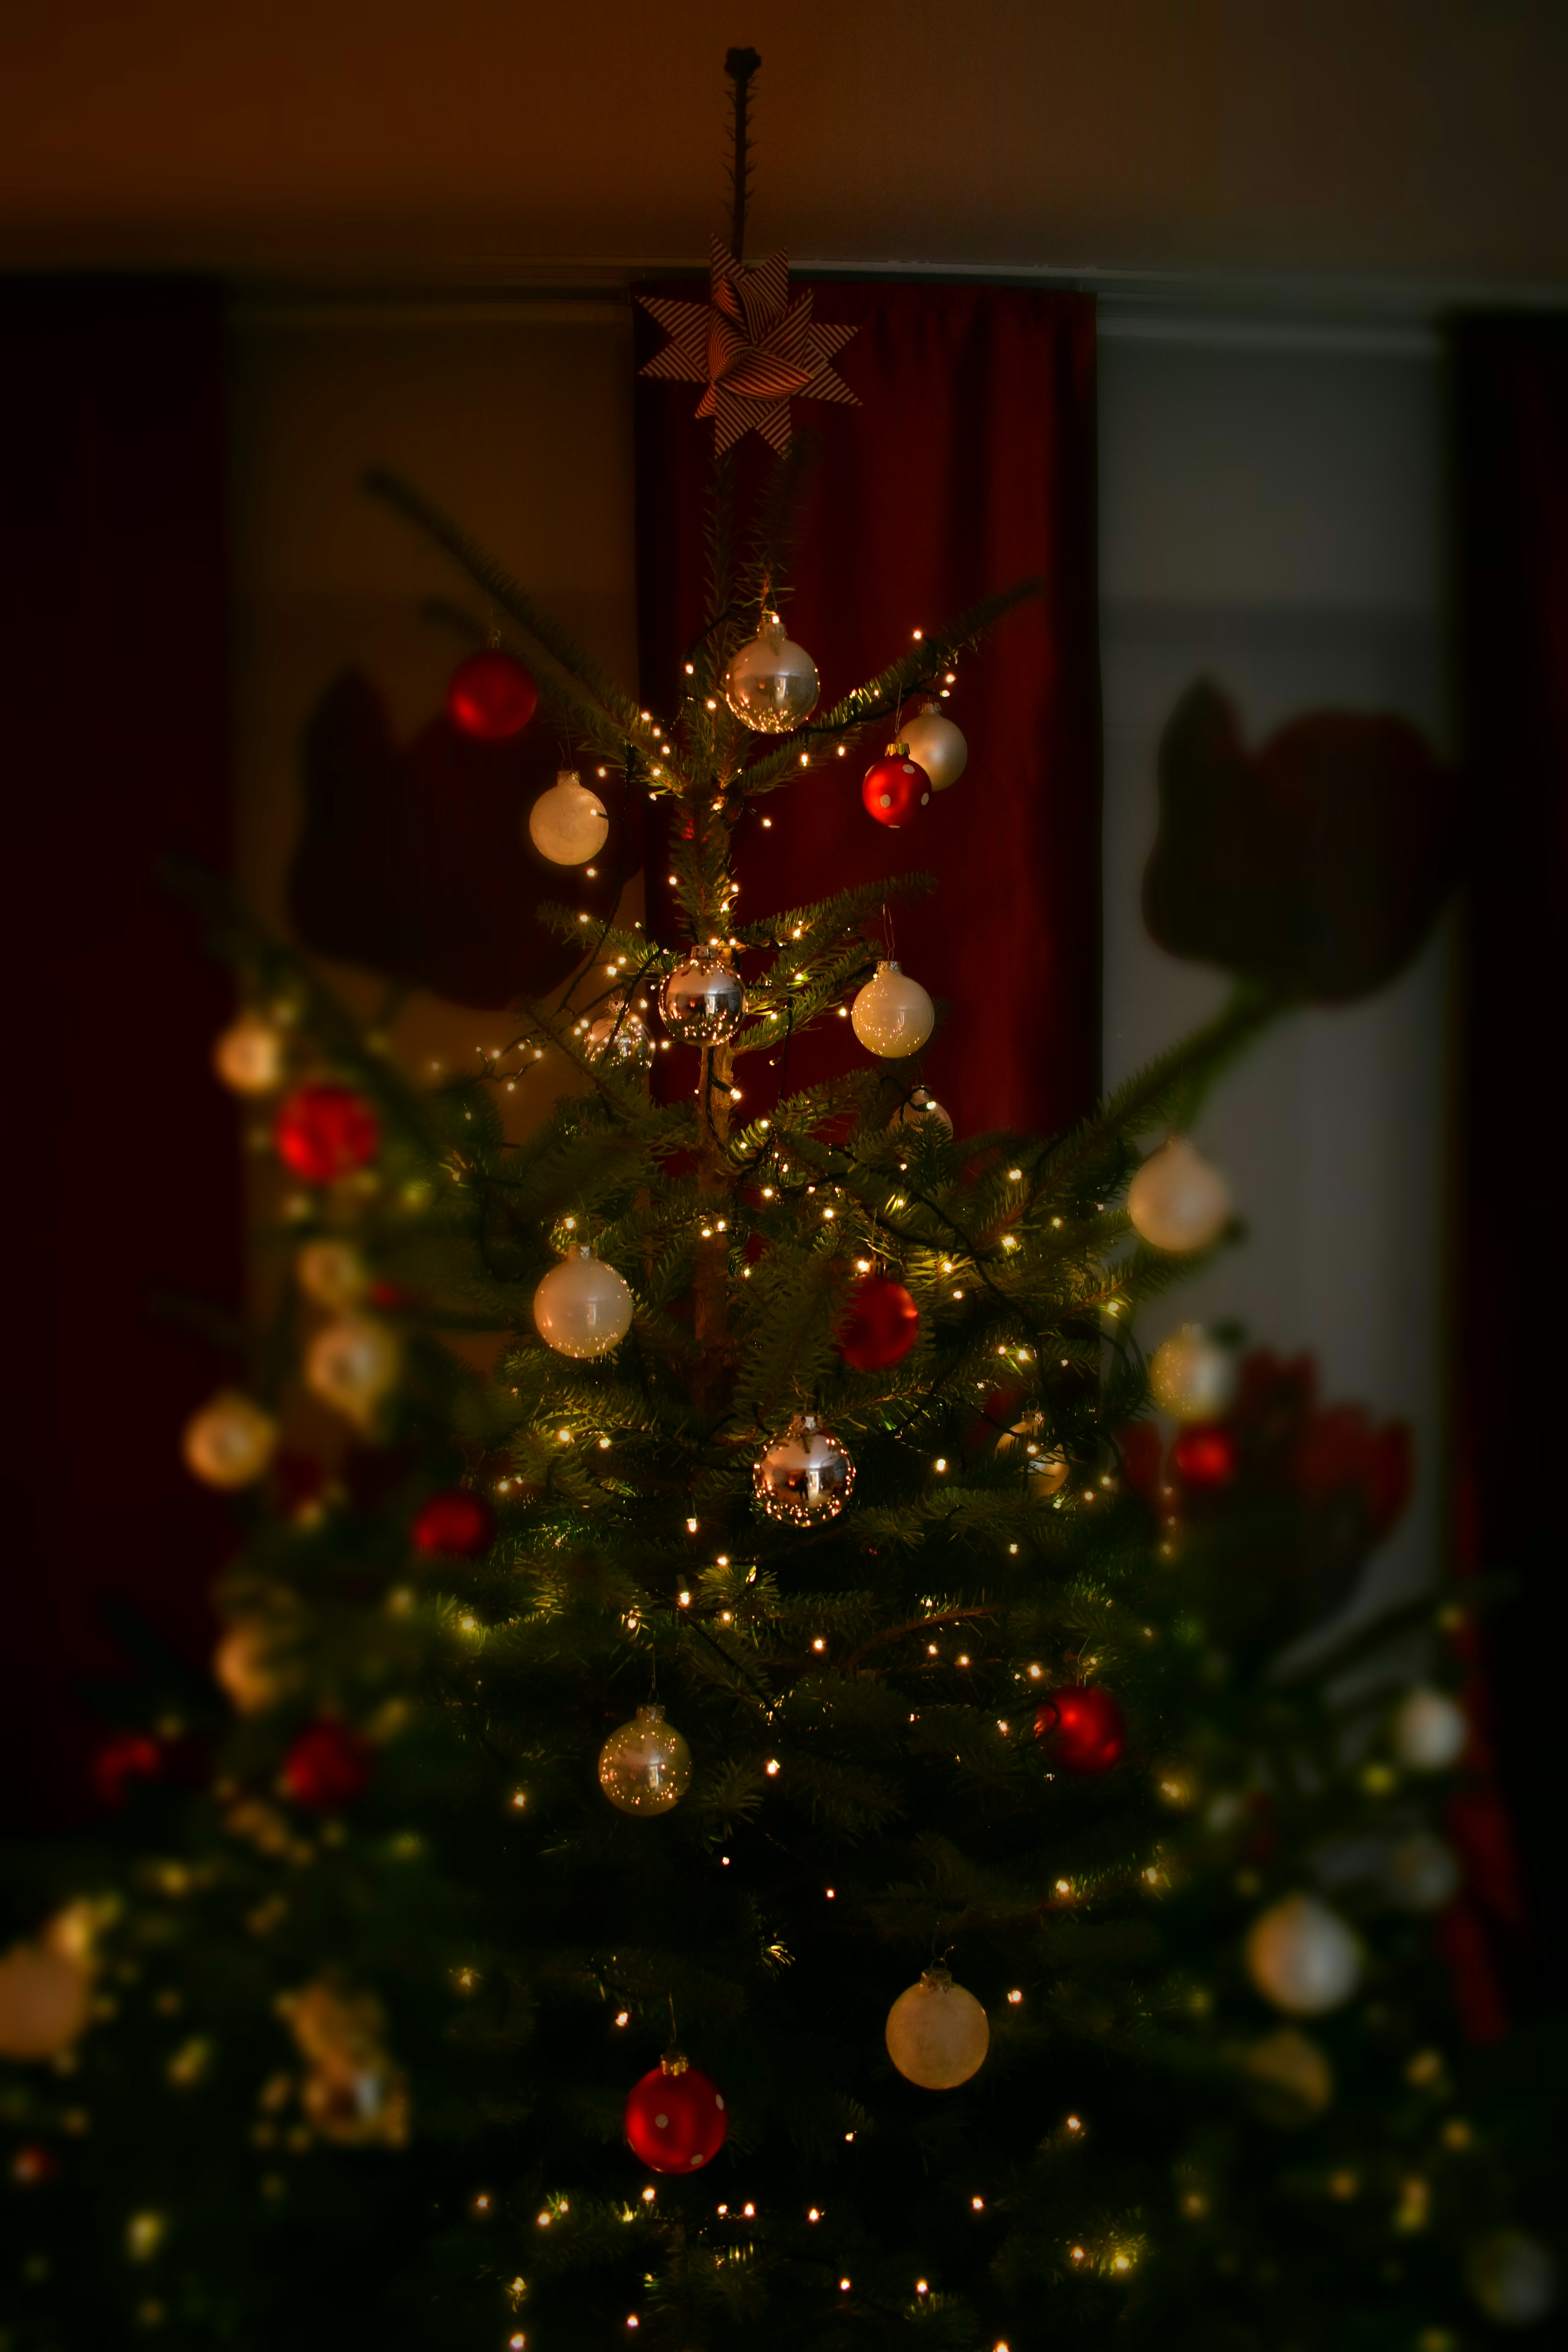 baubles hung on Christmas tree